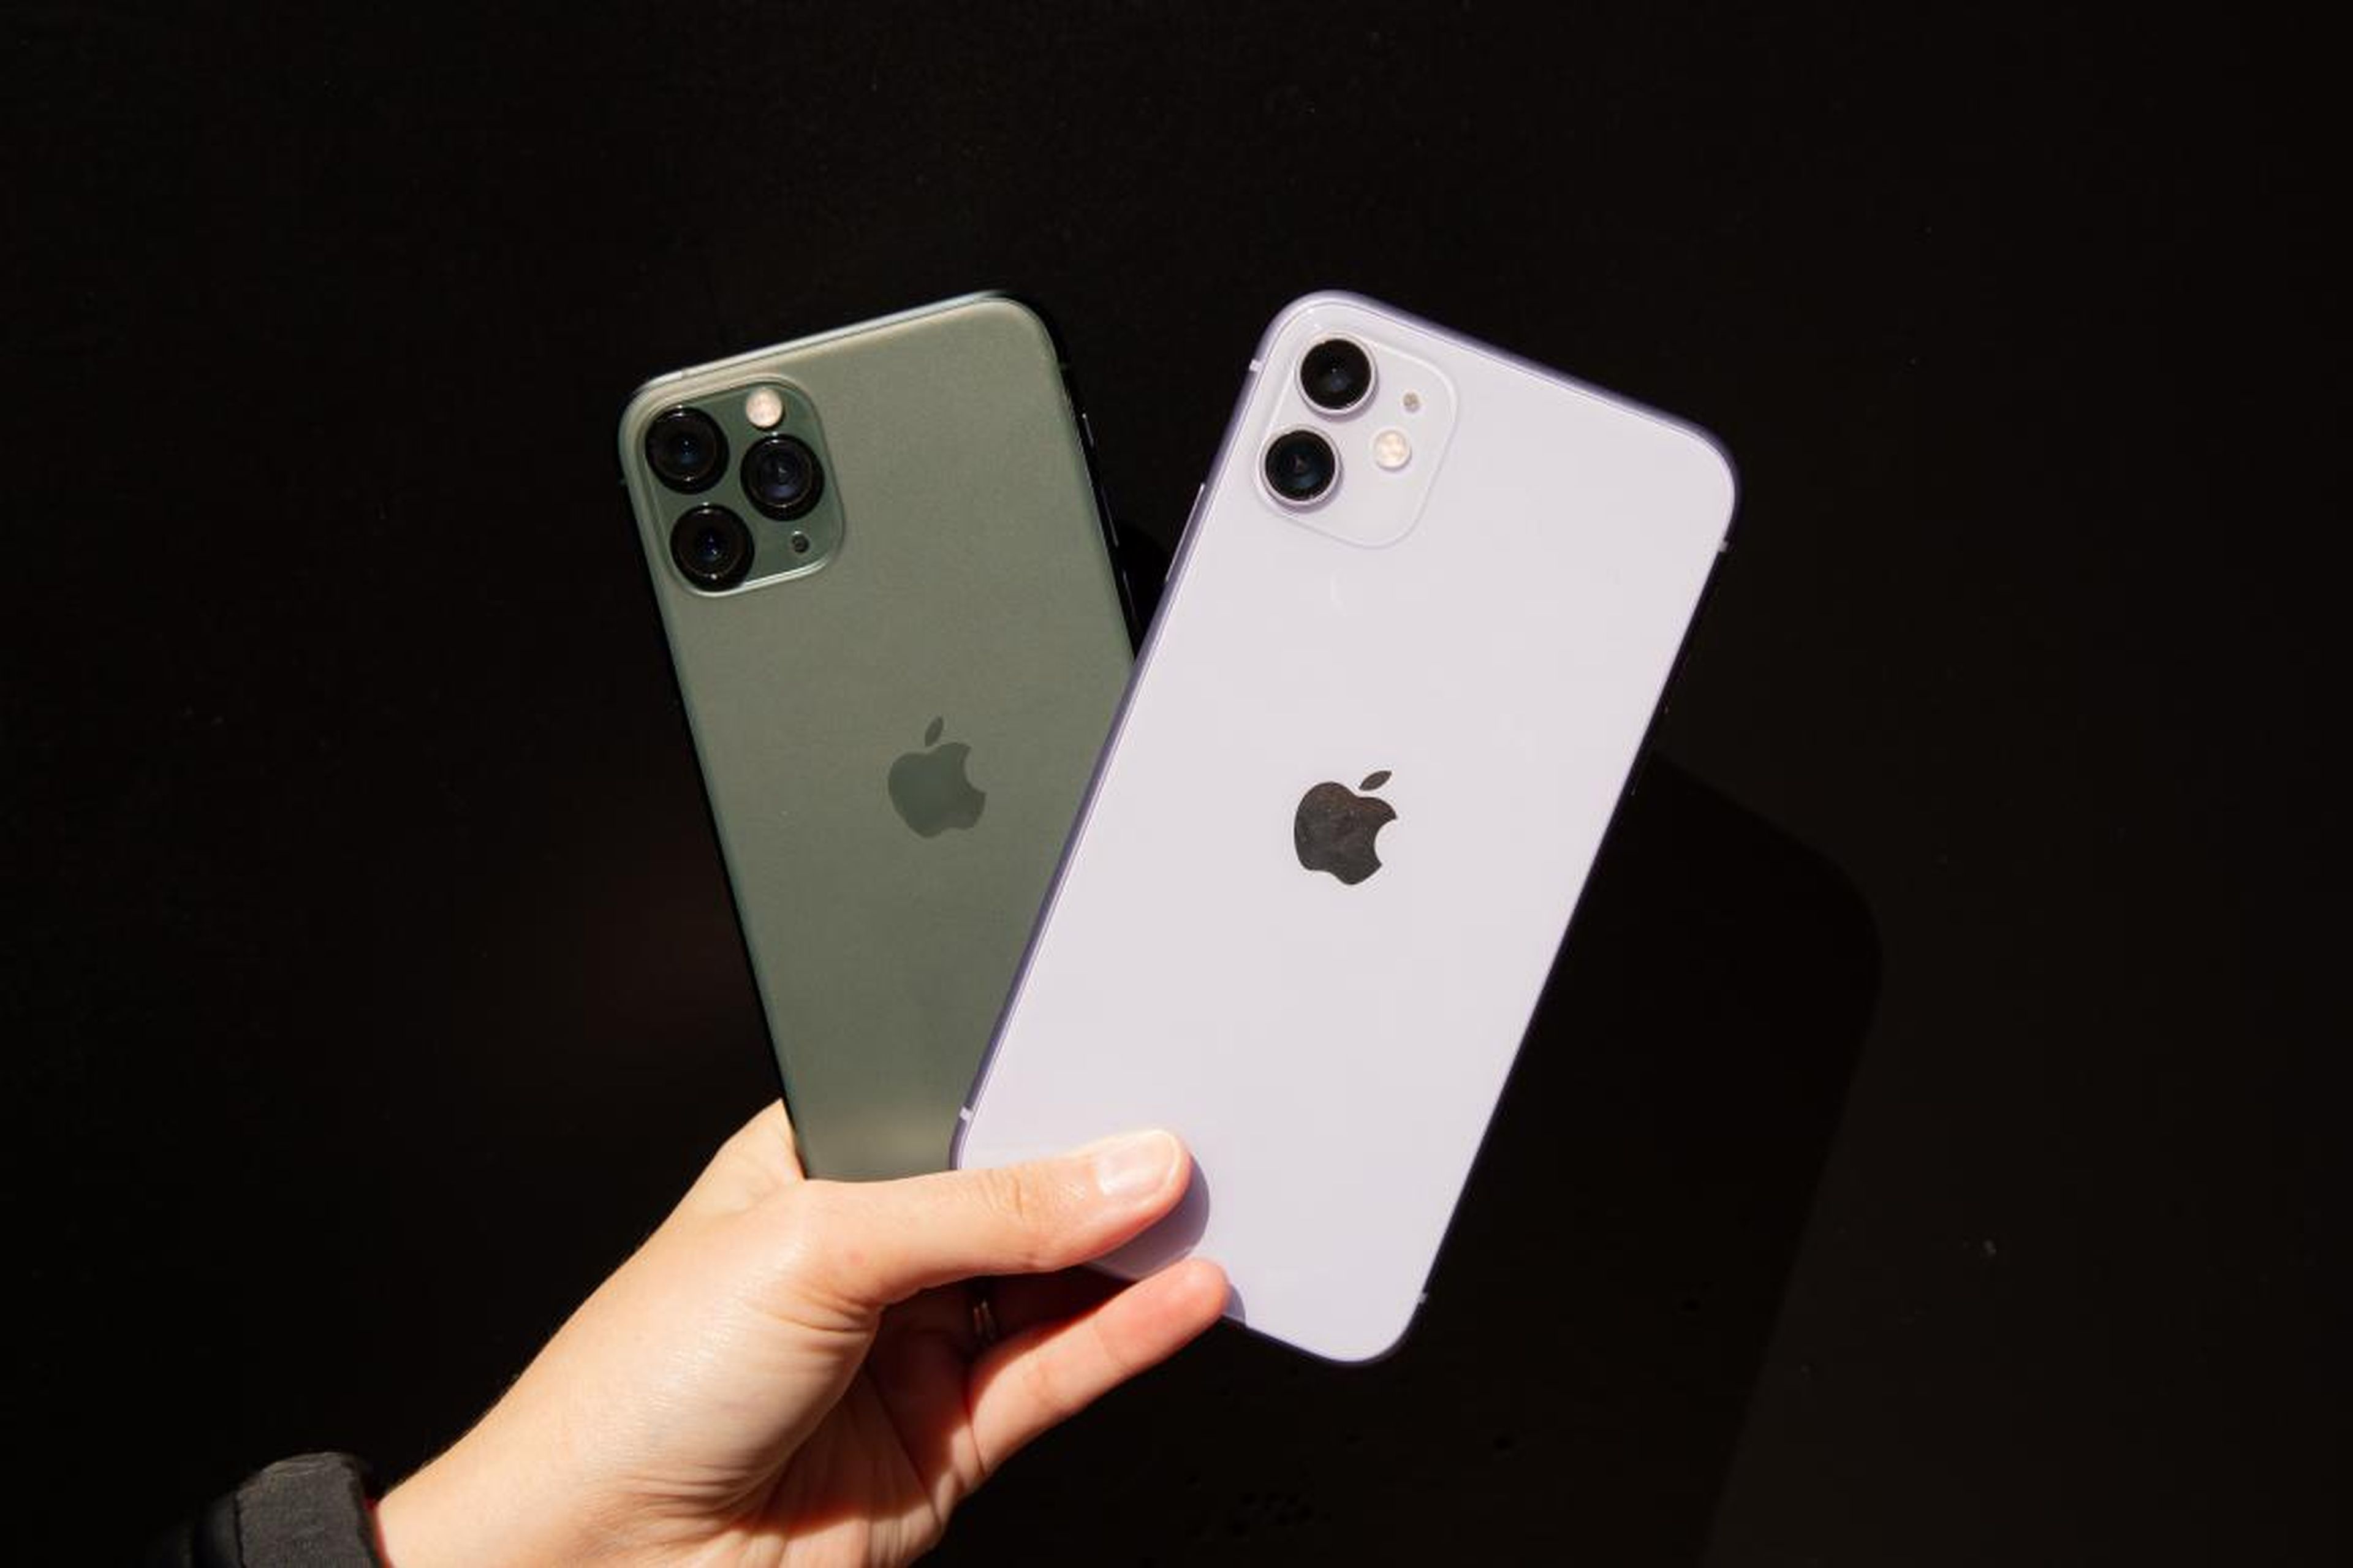 Choosing between the iPhone 11 and the iPhone 11 Pro: